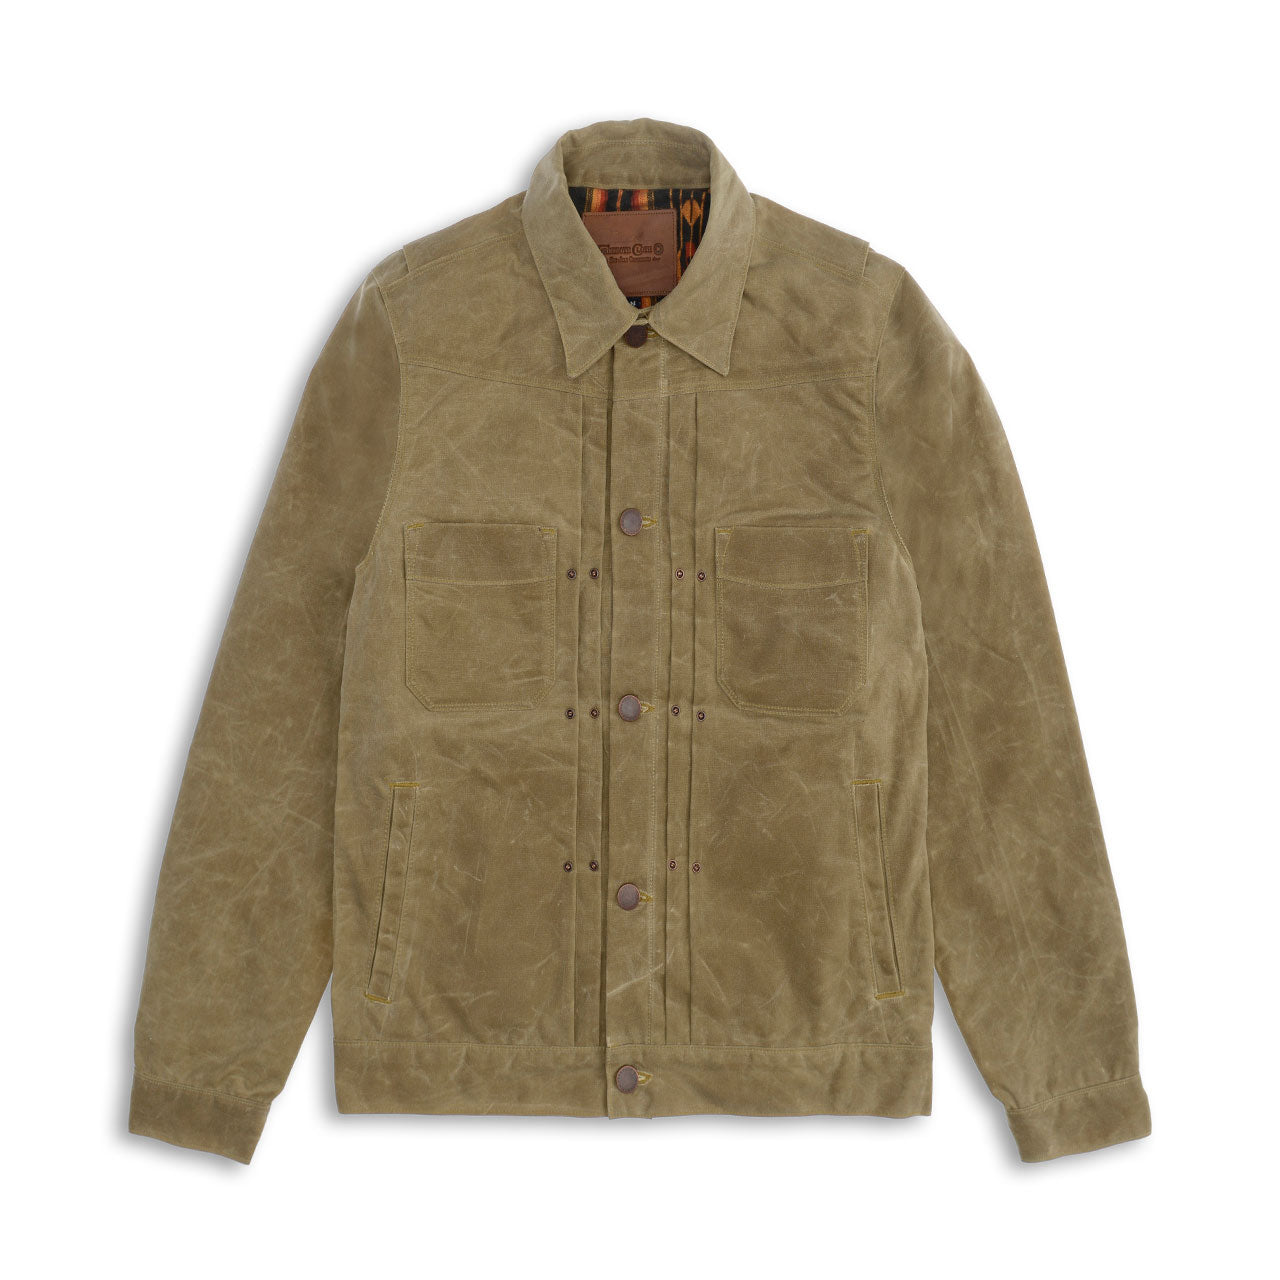 Freenote Cloth Rider's Jacket | Uncrate Supply